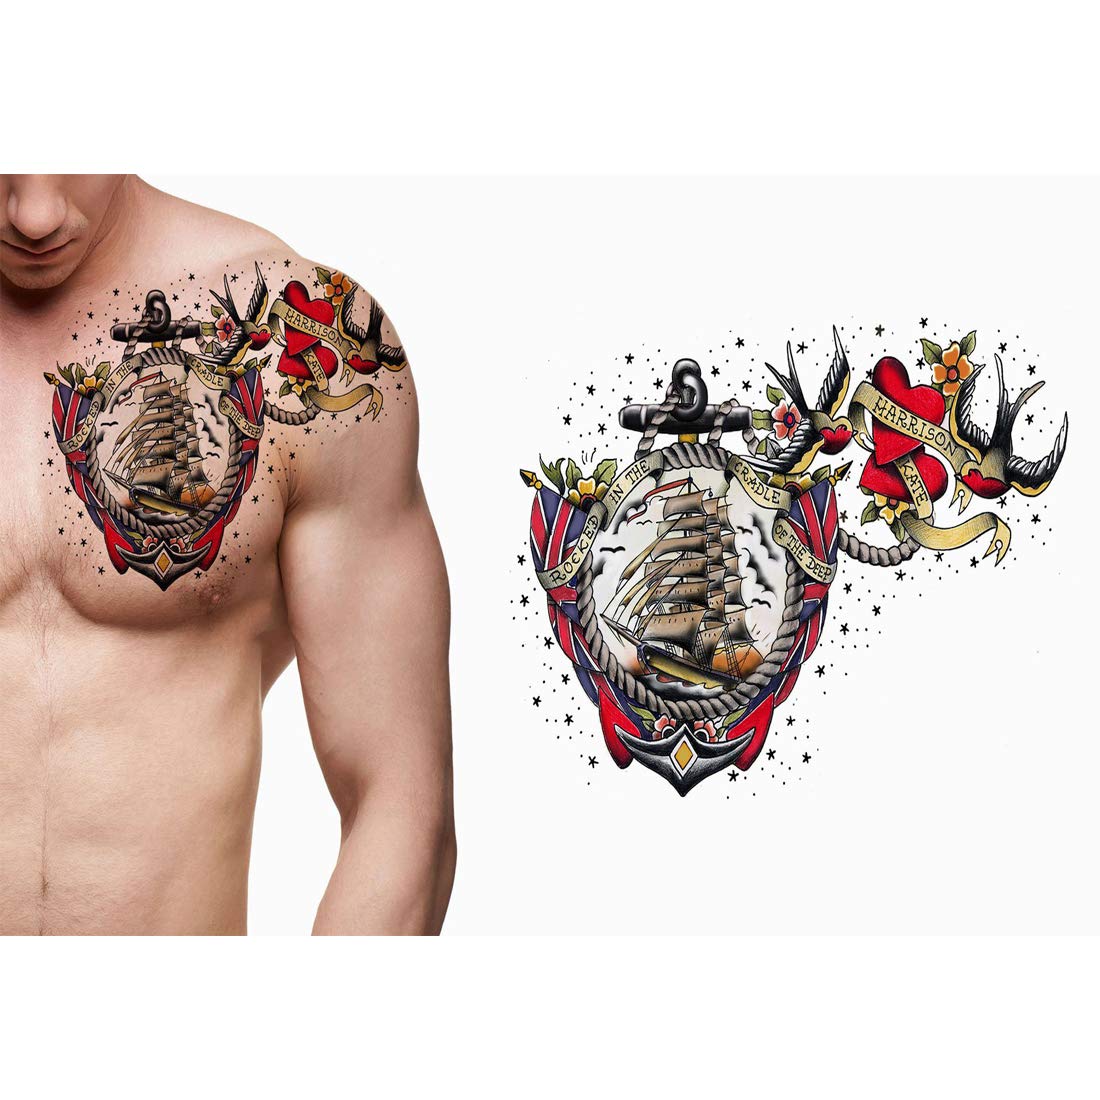 9 Mind-Blowing Robot Tattoo Designs and Ideas